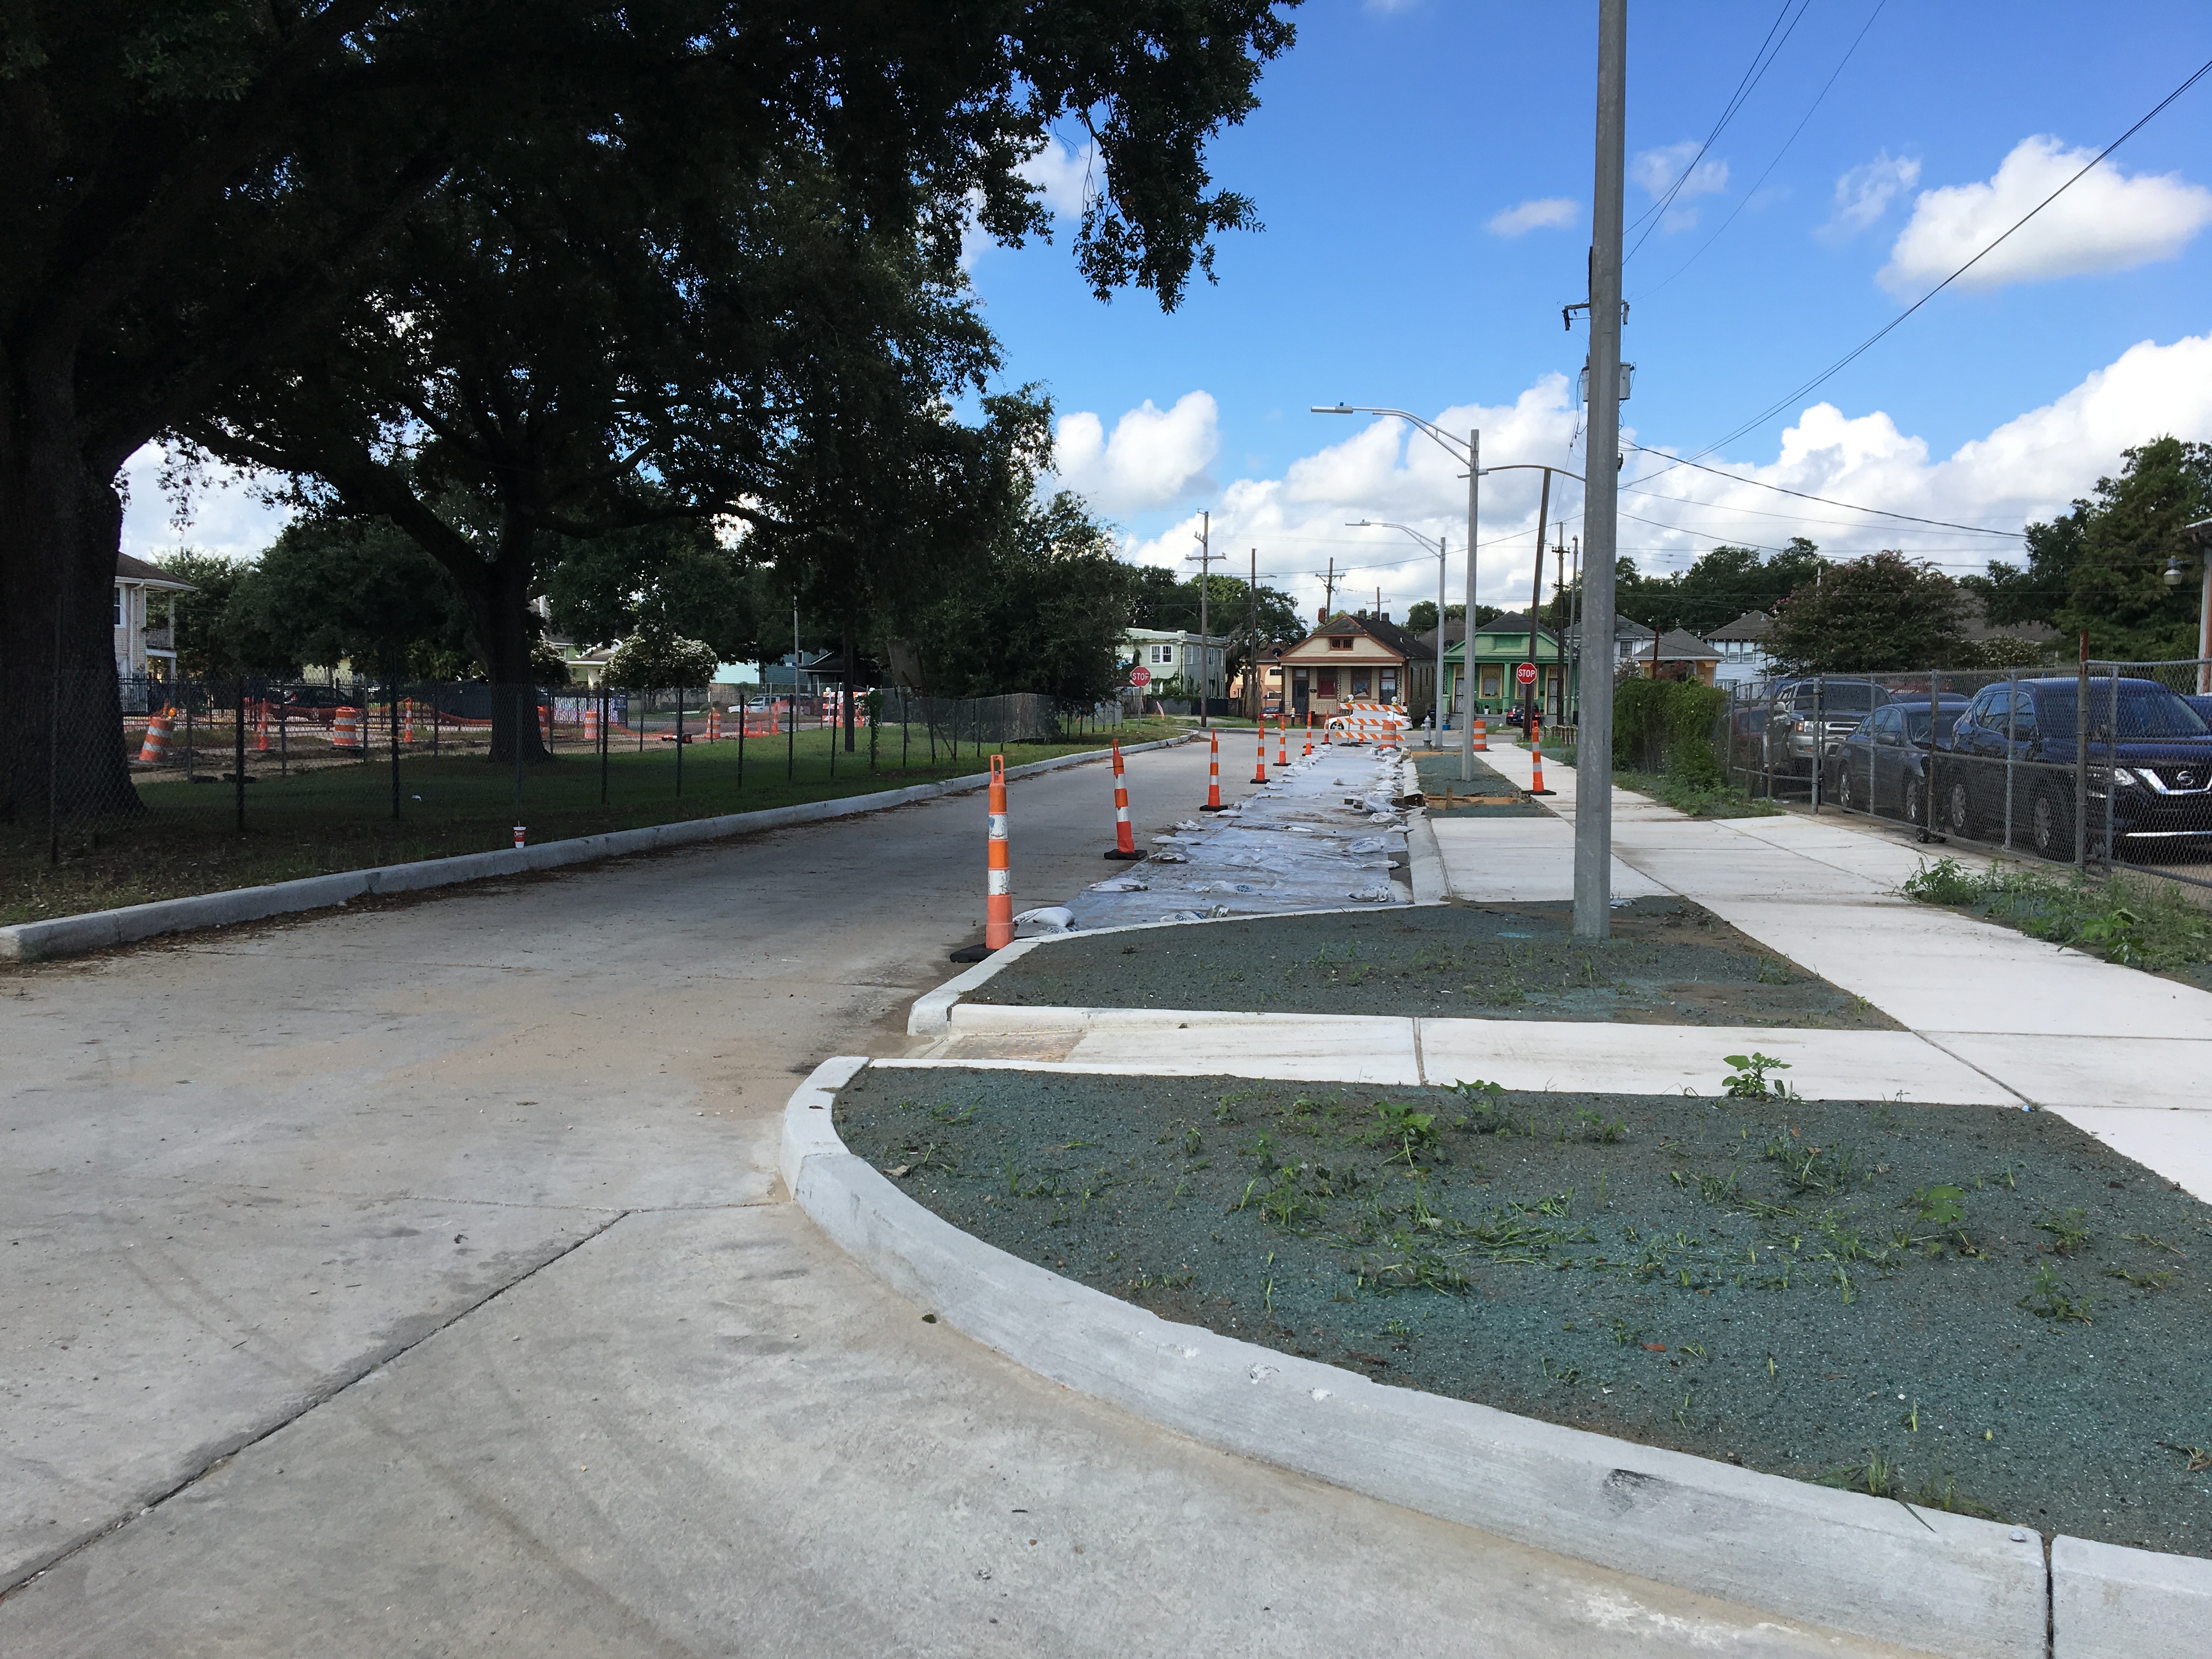 COMMAND CONSTRUCTION INDUSTRIES, LLC COMPLETES PERVIOUS PAVEMENT ON LAKE SIDE OF S. GALVEZ STREET